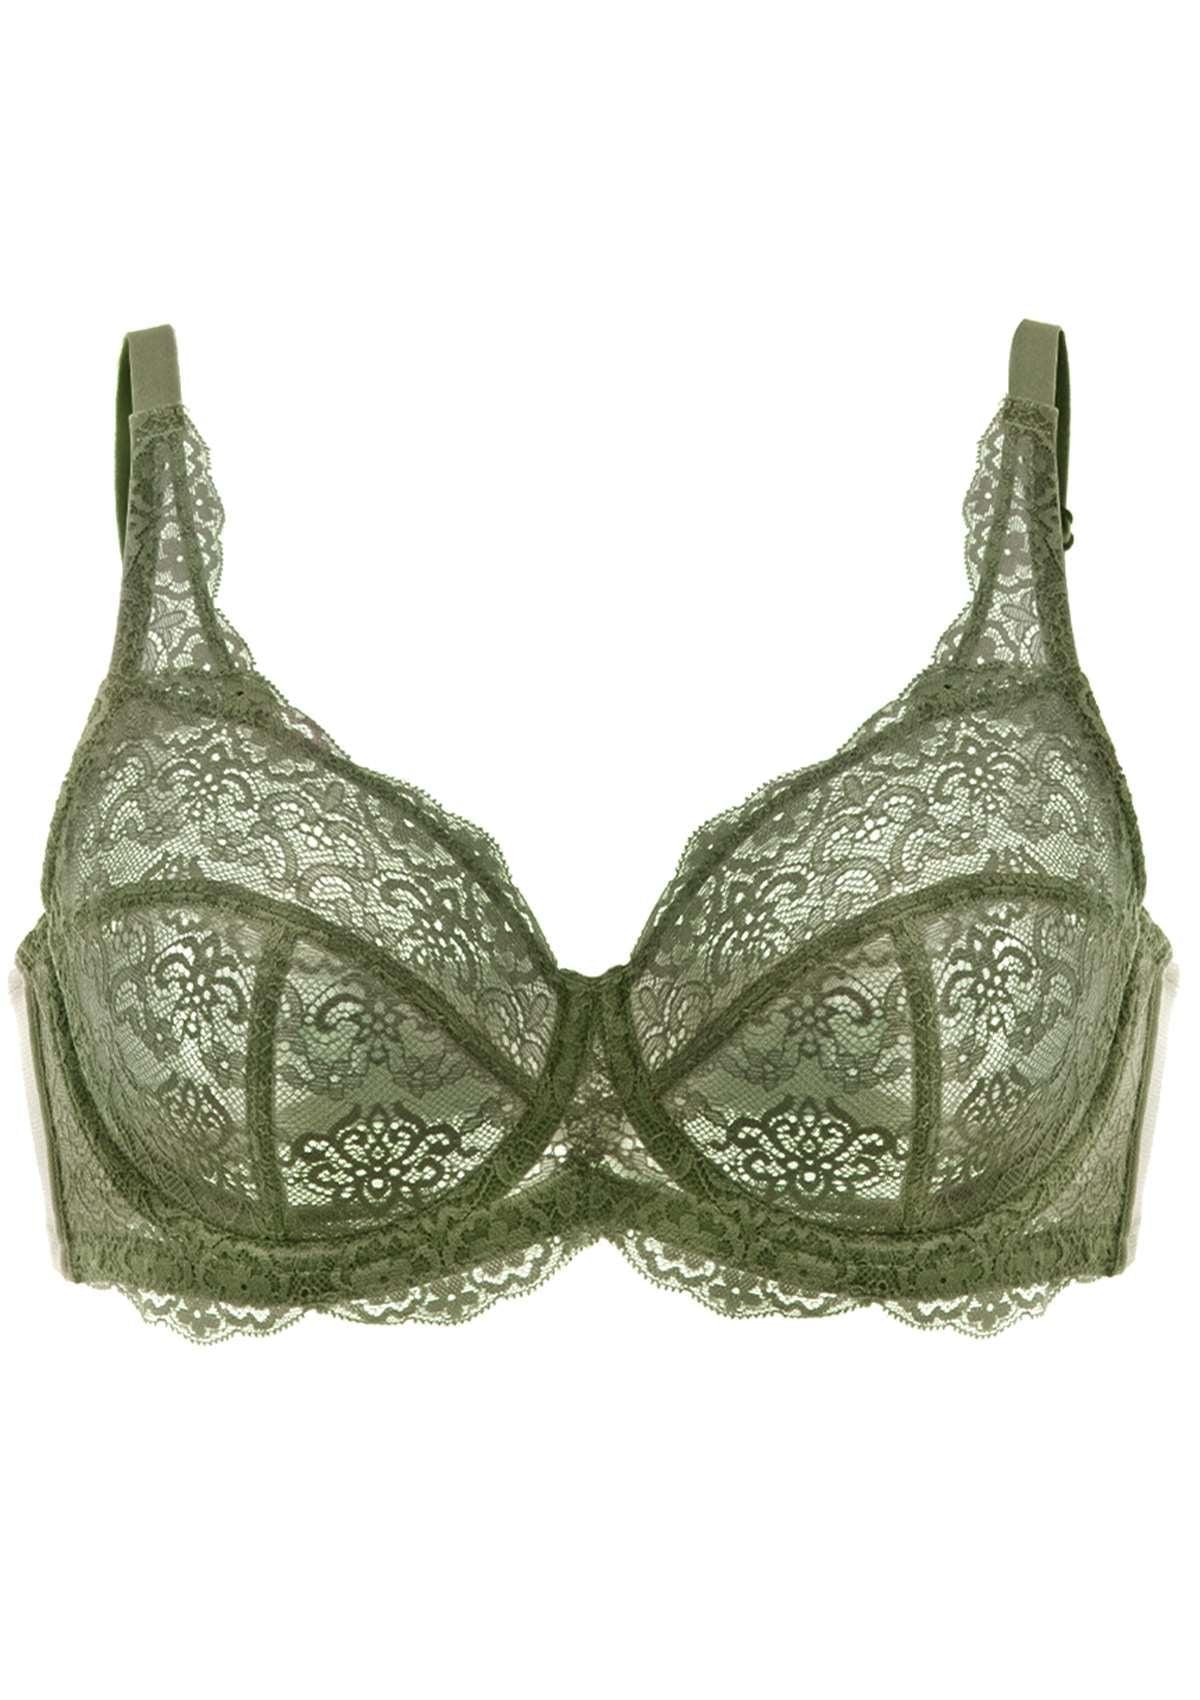 HSIA All-Over Floral Lace Unlined Bra: Minimizer Bra For Heavy Breasts - Dark Green / 36 / C